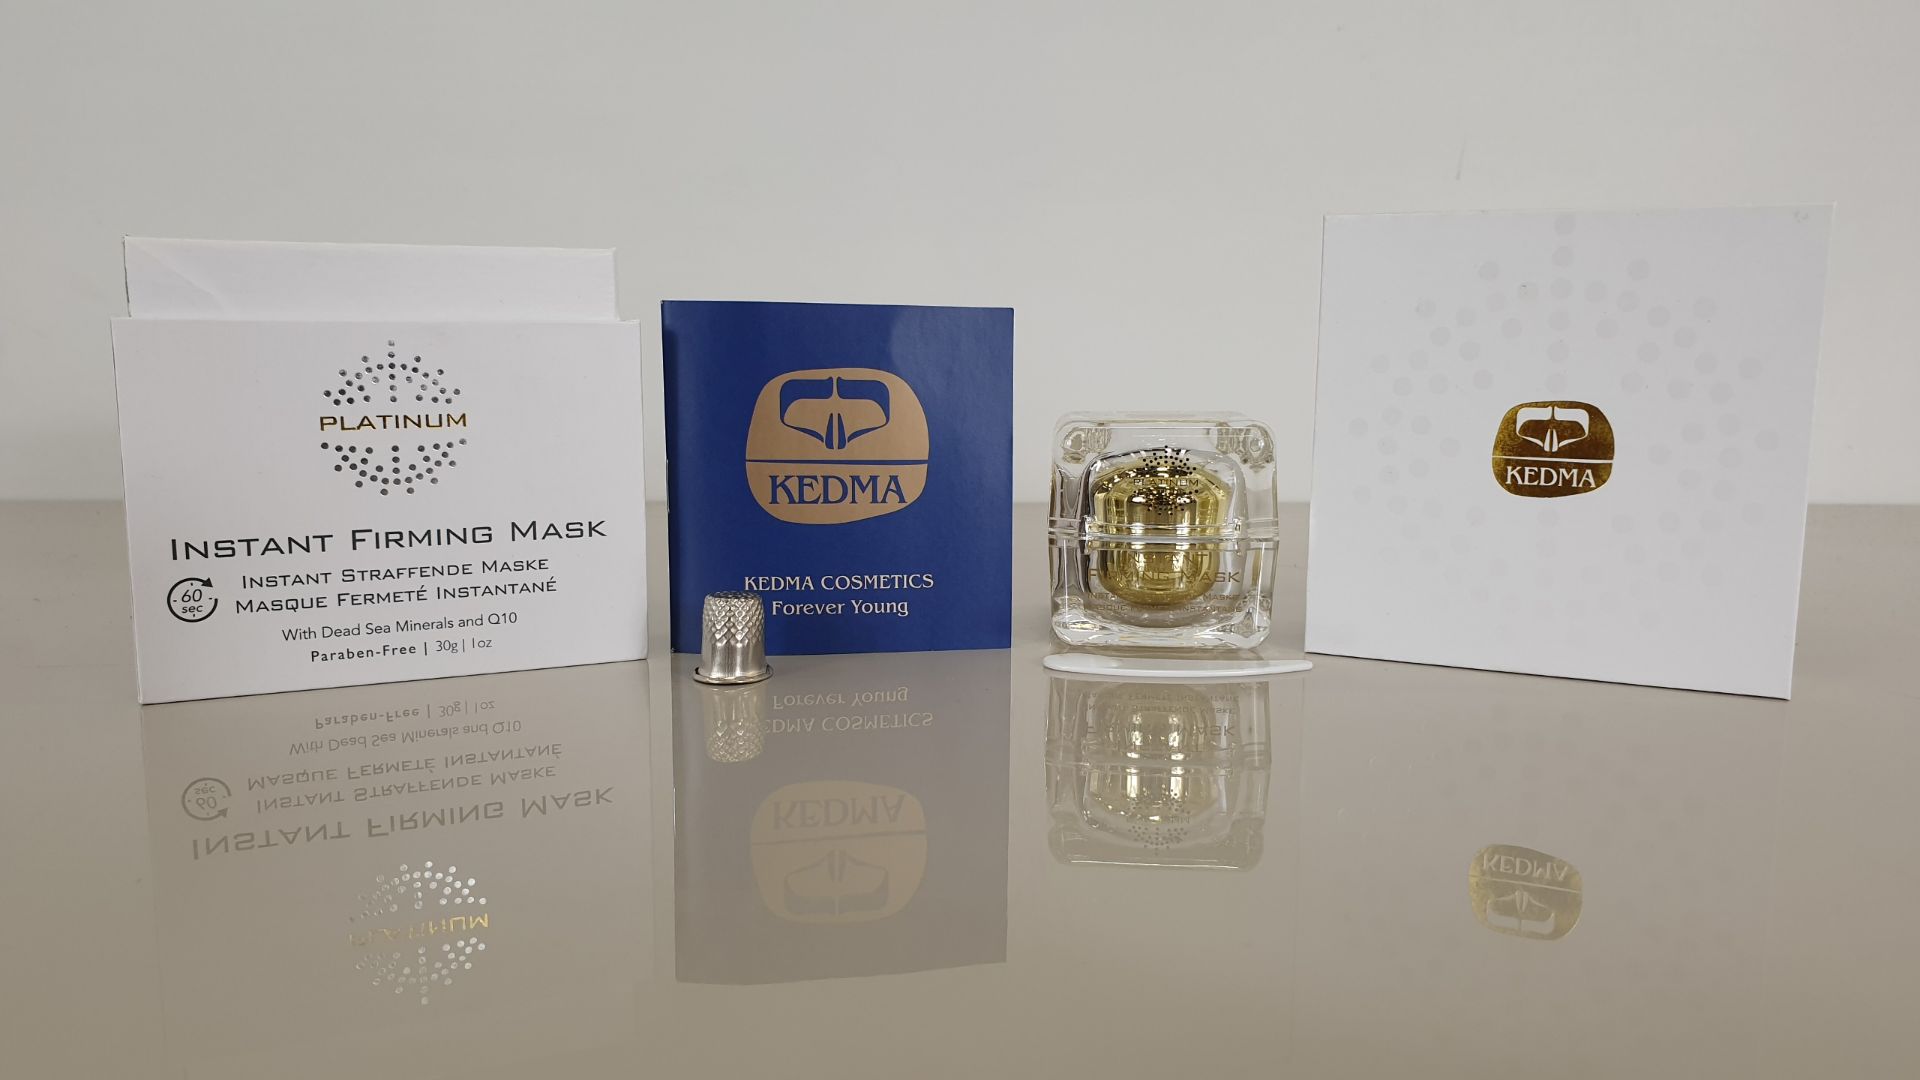 (LOT FOR THURSDAY 28TH MAY AUCTION) 5 X BRAND NEW KEDMA PLATINUM INSTANT FIRMING MASK WITH DEAD